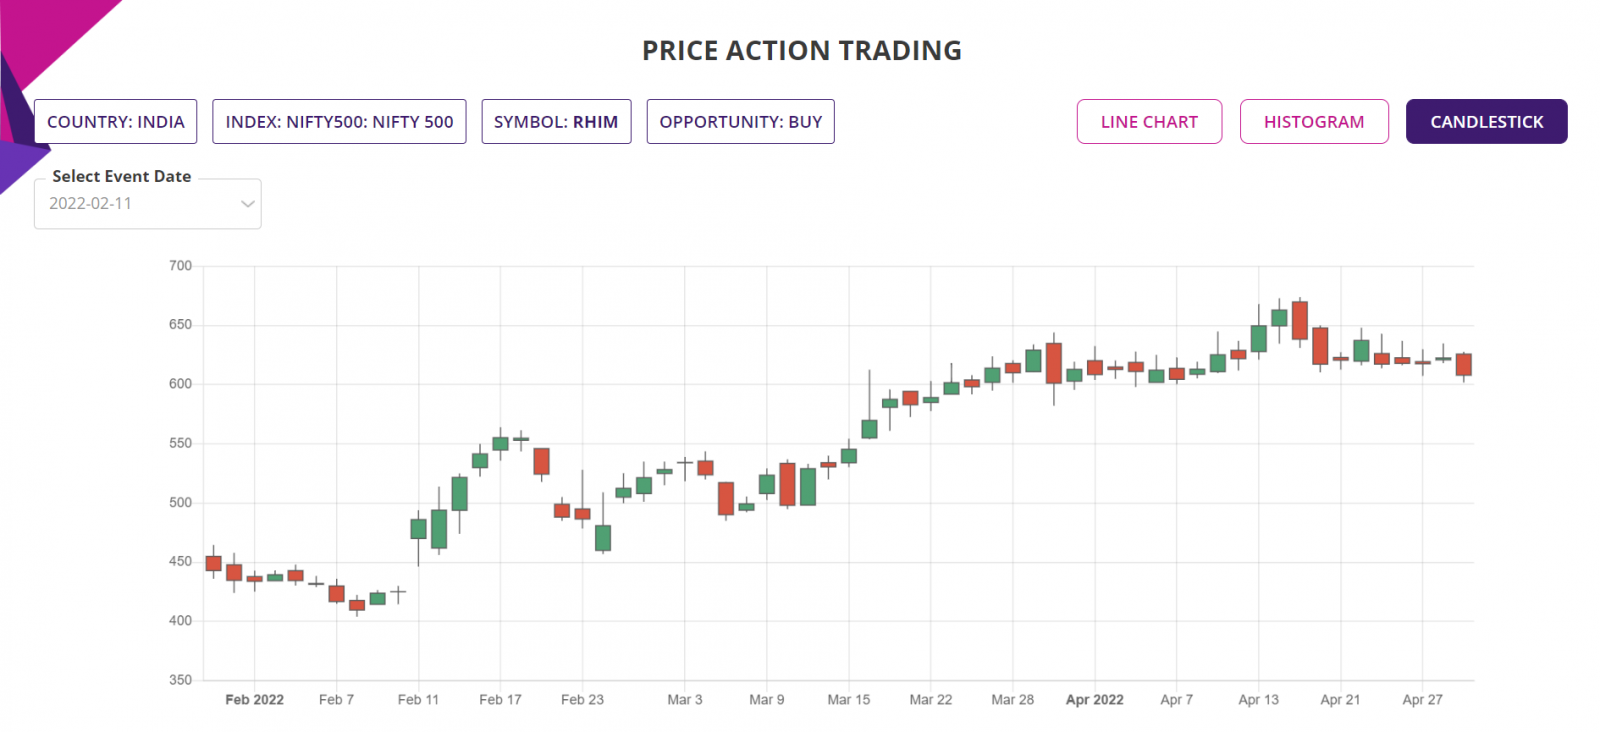 Price action trading strategy, detailed report, Candlestick chart, NIFTY500 Index India